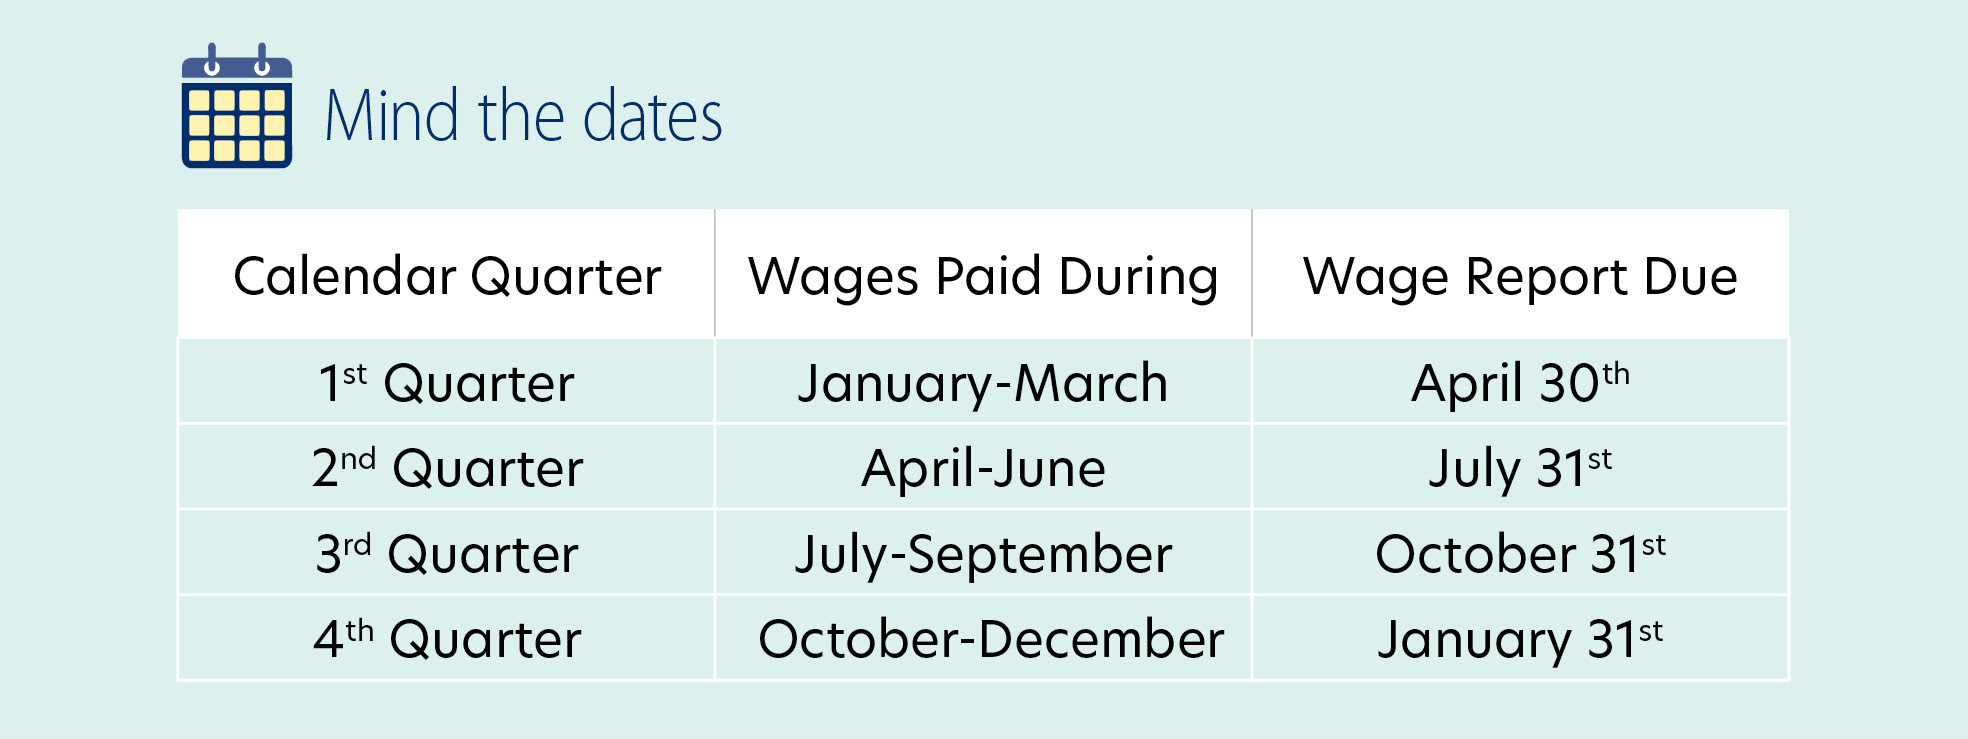 Mind the dates. 1st Quarter: Wages paid during January-March the Wage Report is due on April 30th. The Second Quarter is wages paid between April and June and the Wage Report is due on July 31st. The third quarter is July-September and the Wage Report is due on October 31st. The fourth quarter is wages paid between October and December and the Wage Report is due on January 31st.